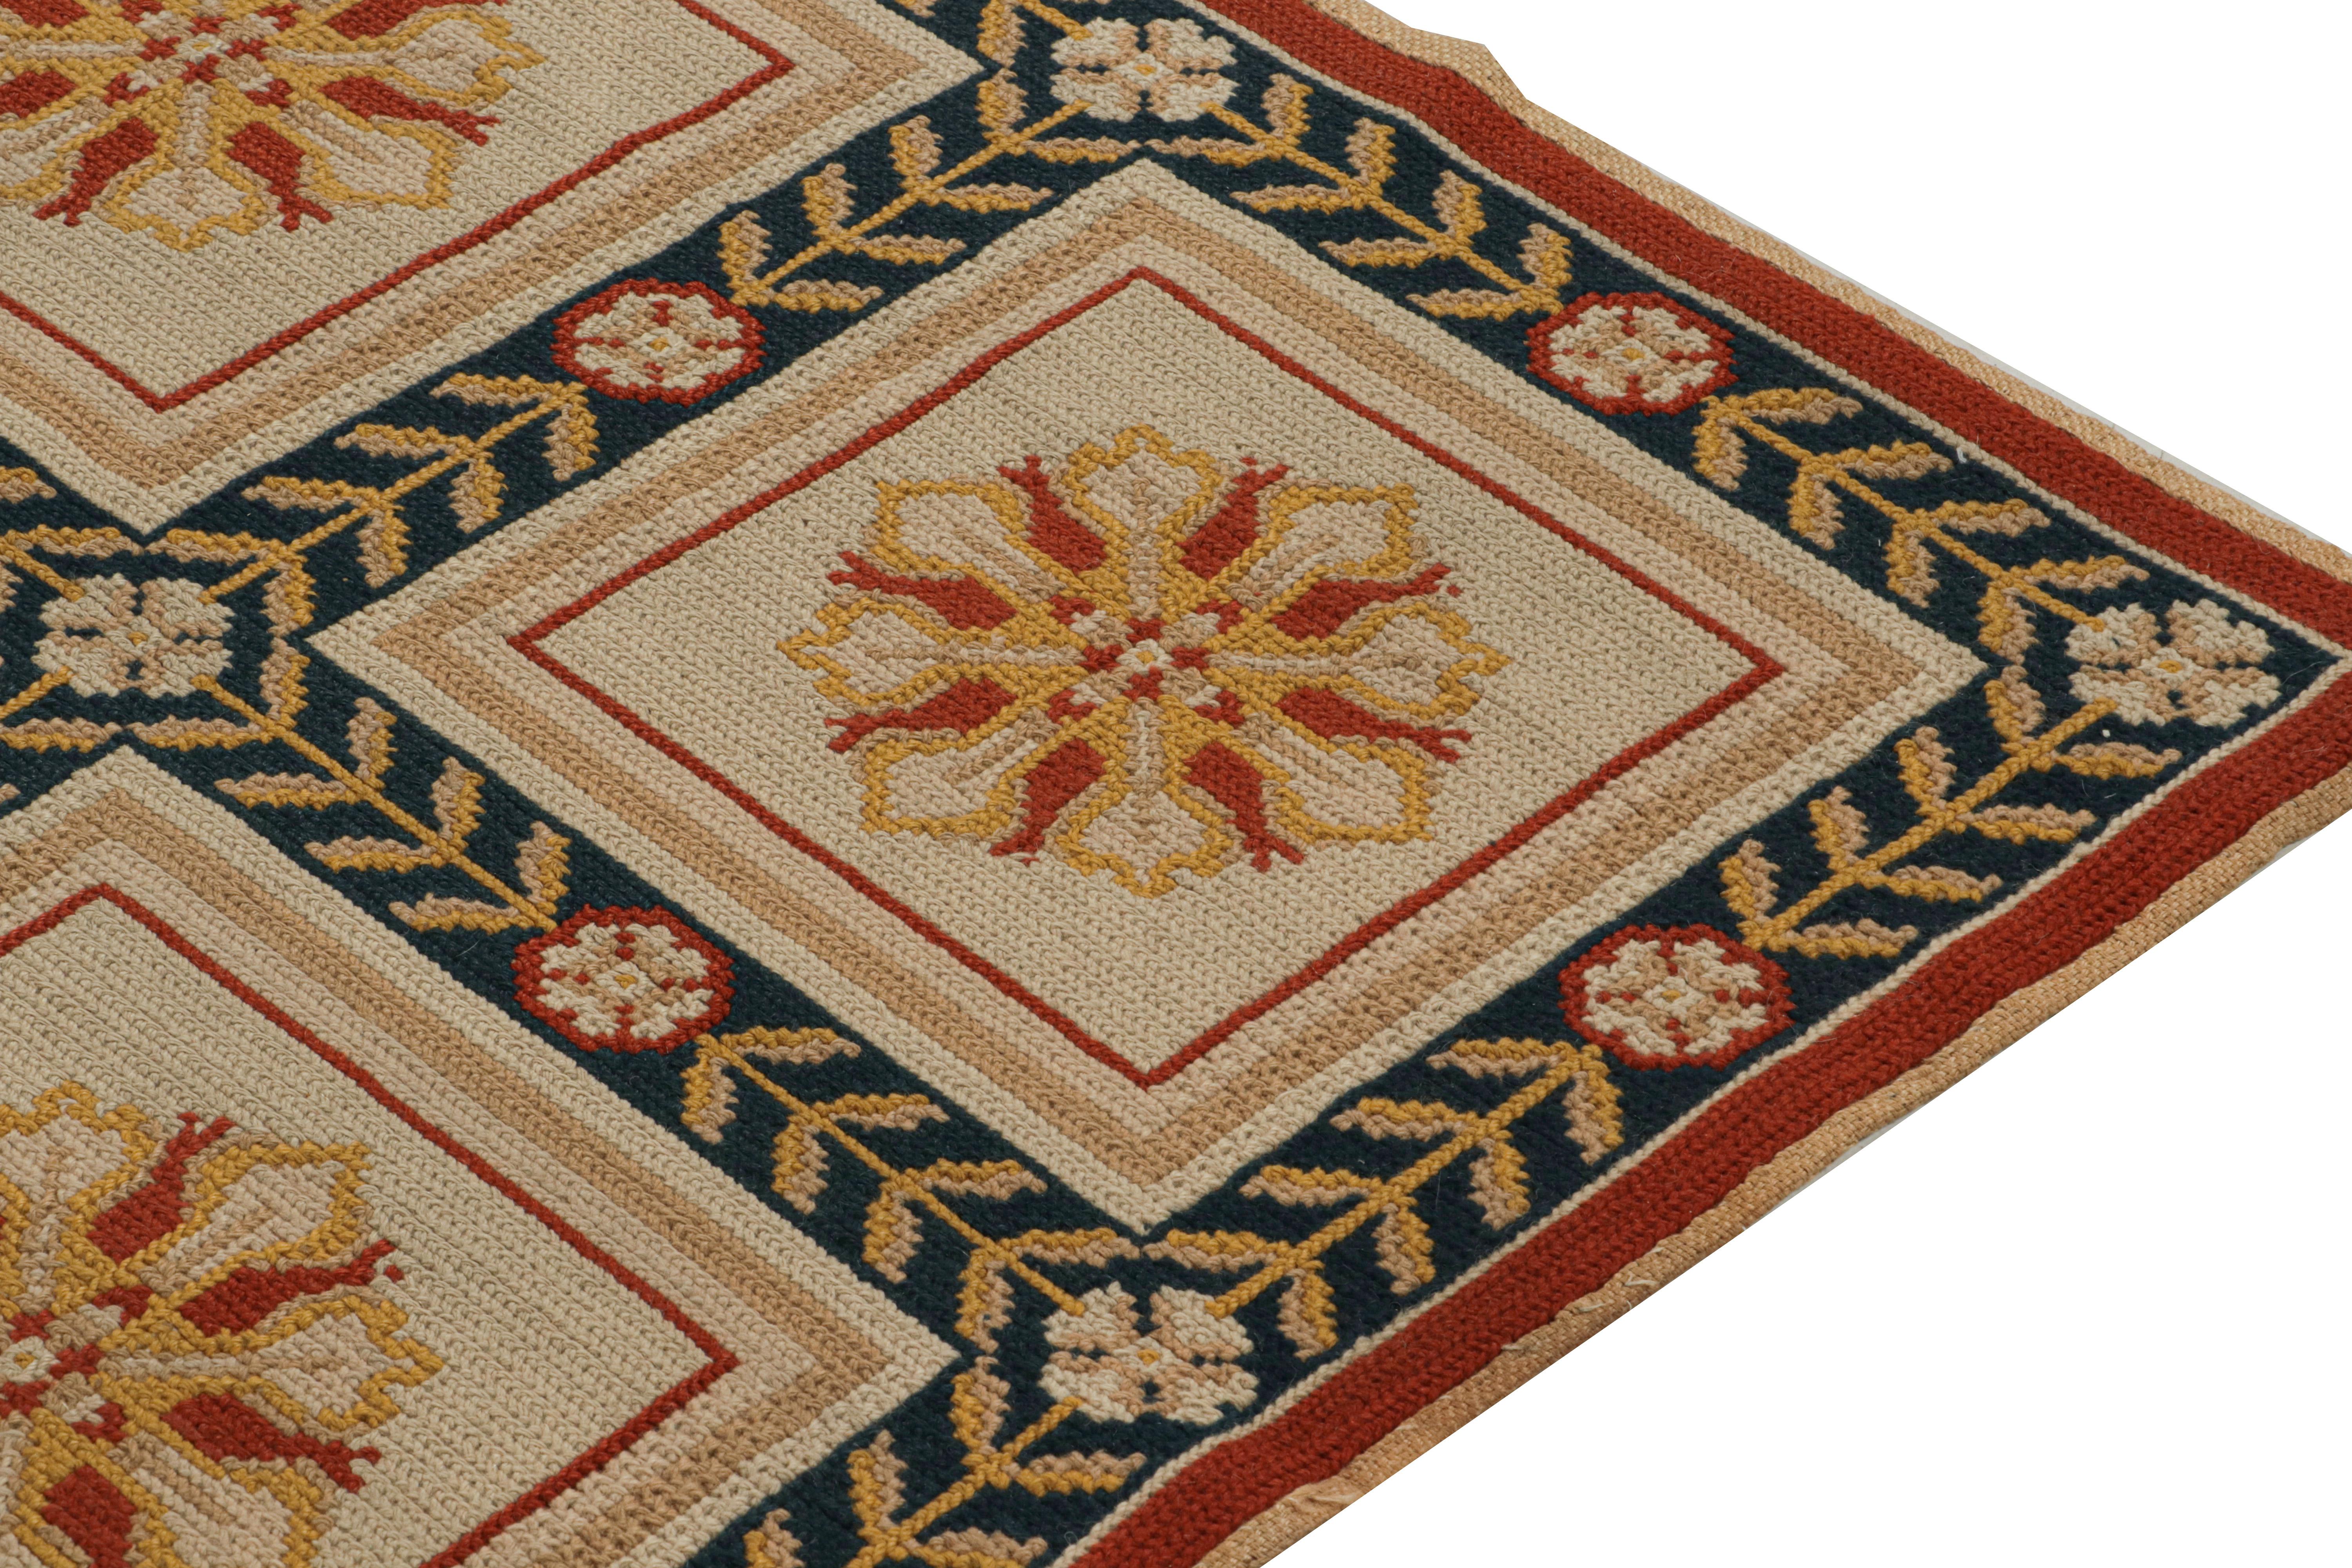 Vintage Arraiolos Needlepoint runners in Beige, Red and Gold Floral Medallions In Good Condition For Sale In Long Island City, NY